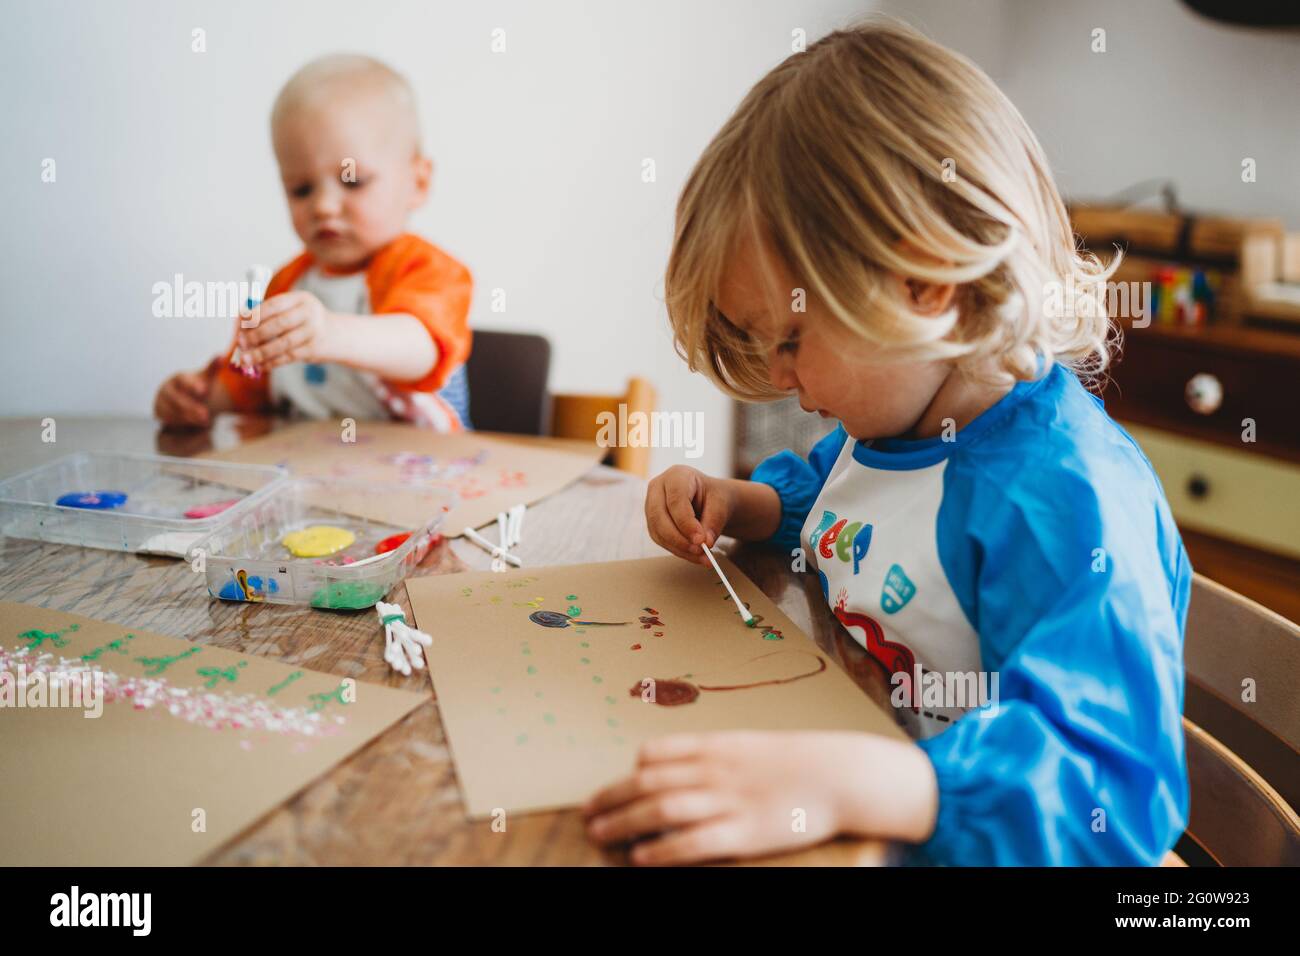 Young kids painting with lots of colorful paints at home in lockdown Stock Photo